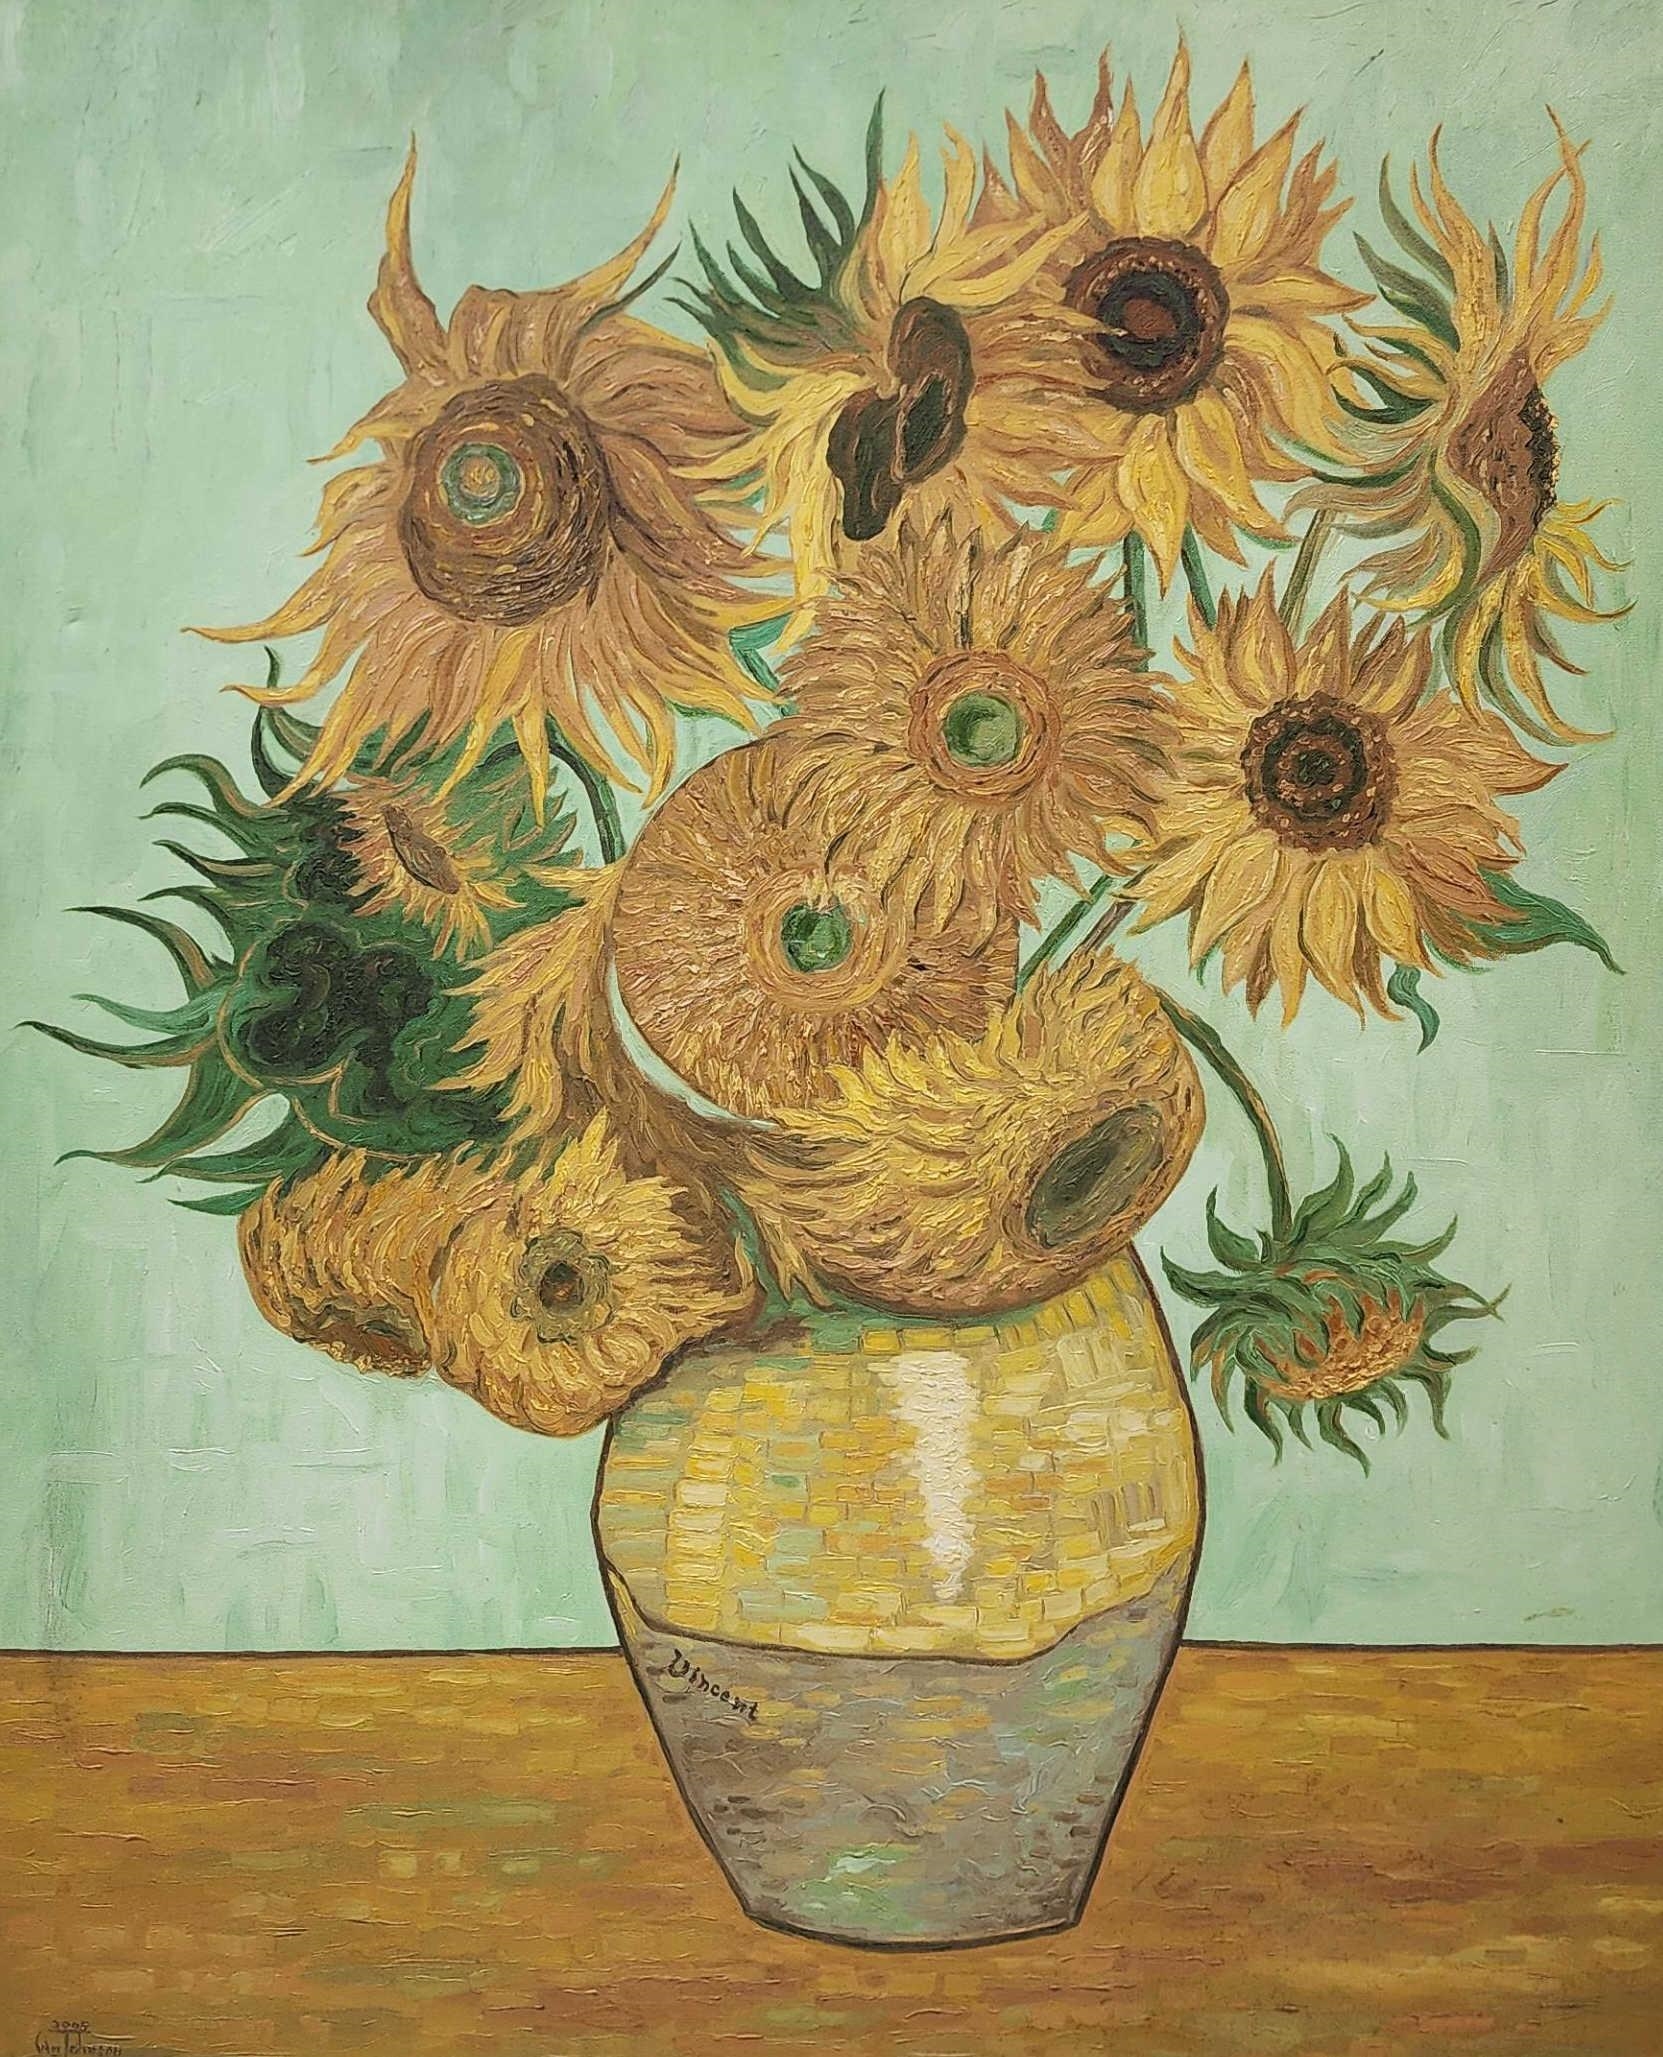 Artwork by Vincent van Gogh, Painting Of Vincent Van Gogh's " Vase With Twelve Sunflowers"., Made of Oil On Canvas Painting